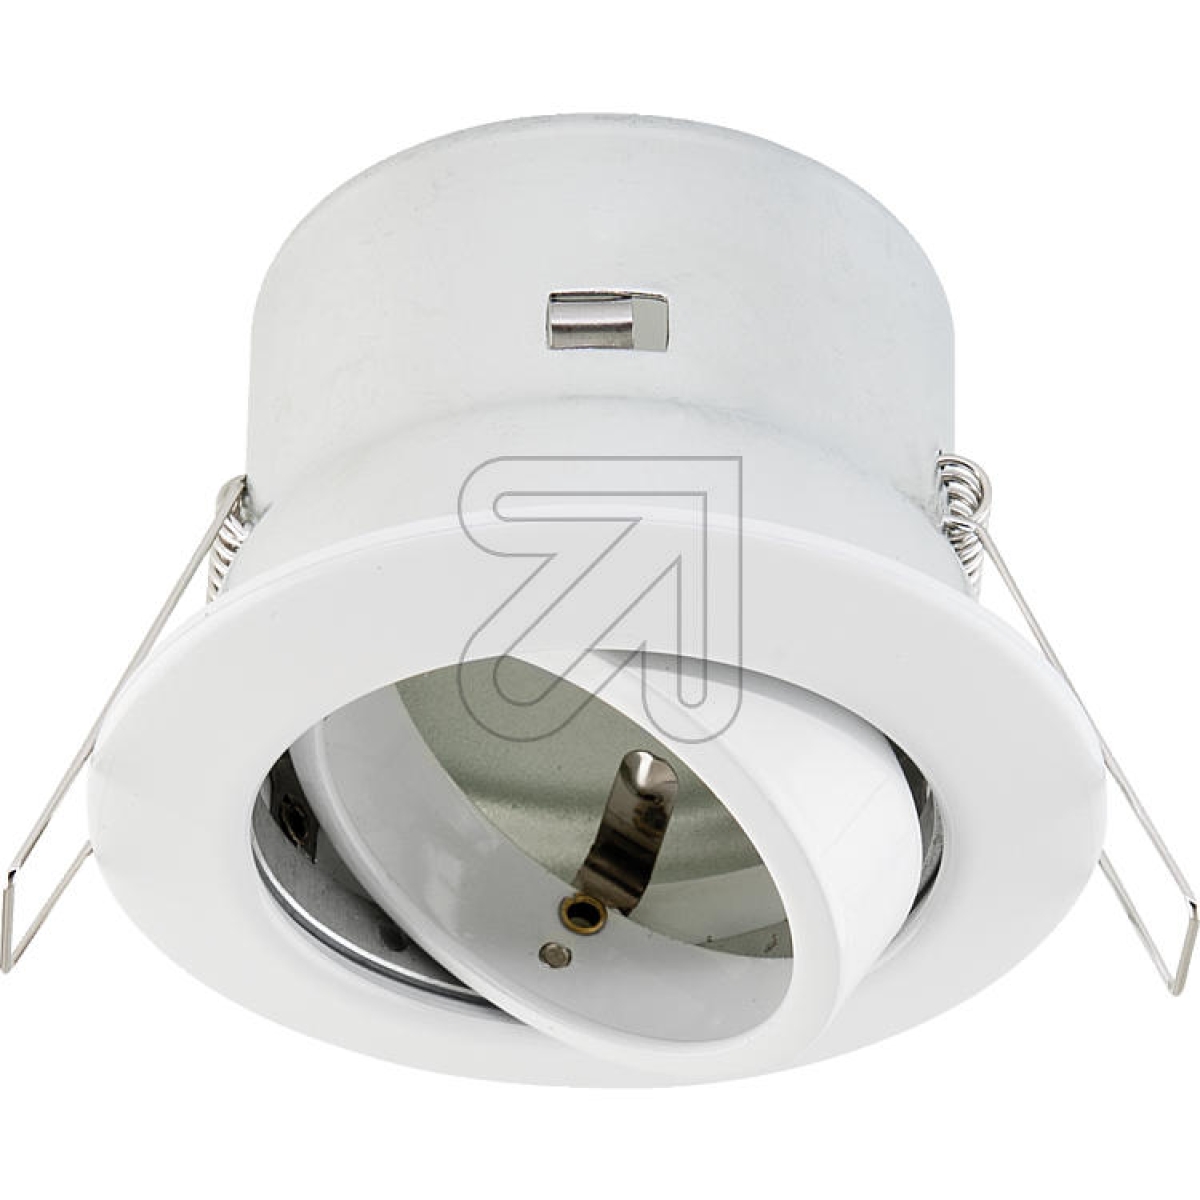 EVNRecessed light white, rotatable and pivotable 753 001 50WArticle-No: 654245